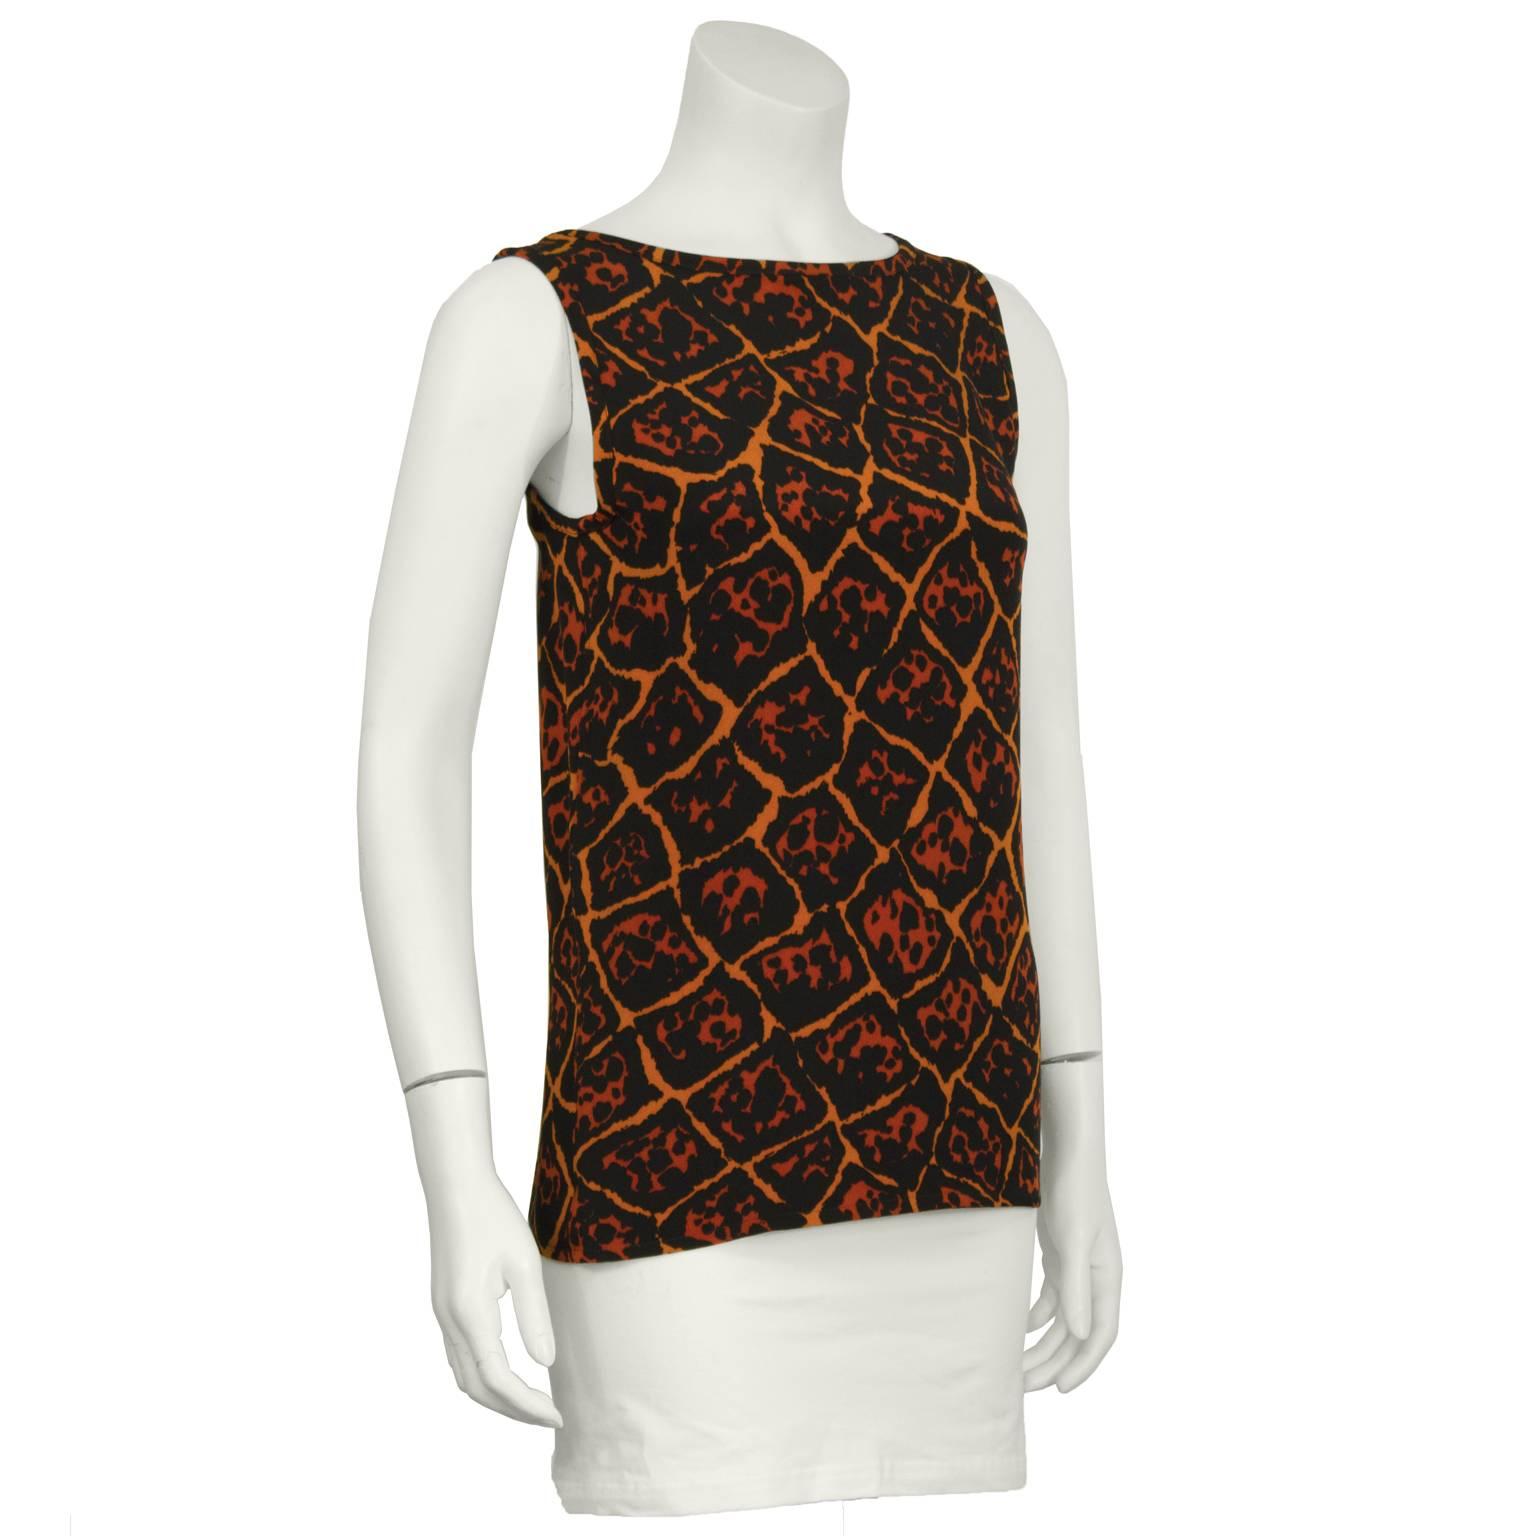 1980's Yves Saint Laurent leopard print silk tank top. Simple wide strap tank has a scoop neck, and an allover leopard print in tan, amber and black. Excellent condition. Fits like a US size 4-6.